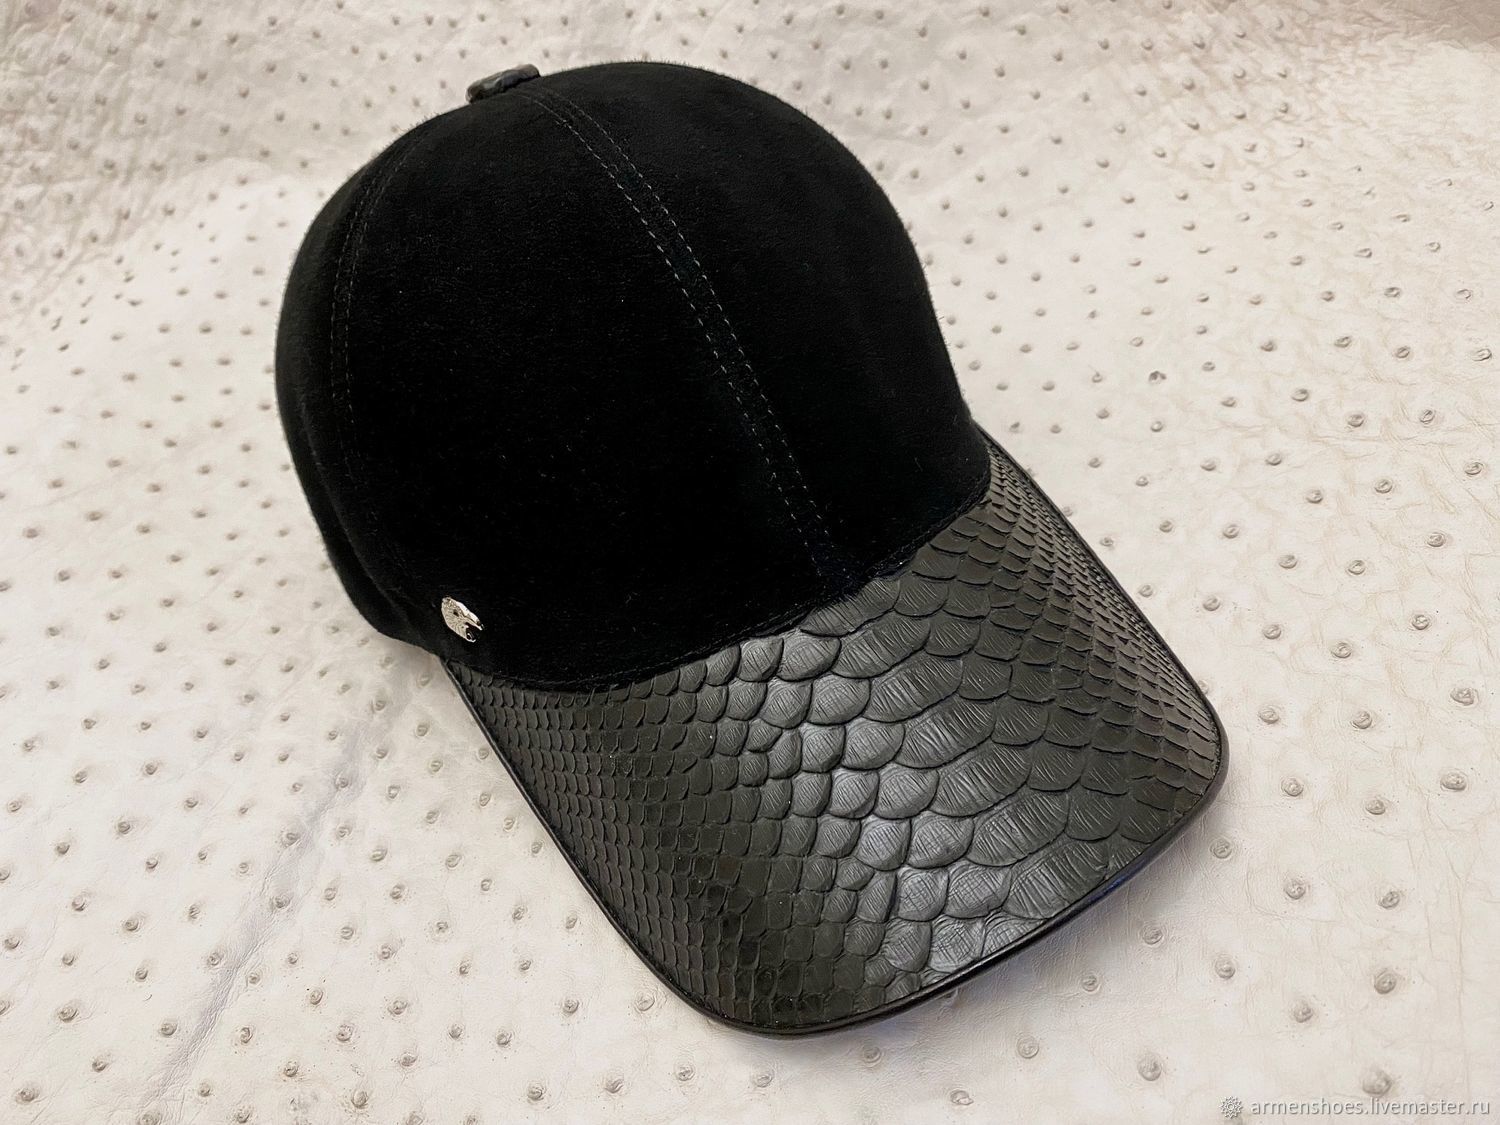 Men's baseball cap, made of genuine python leather and genuine suede, Baseball caps, St. Petersburg,  Фото №1